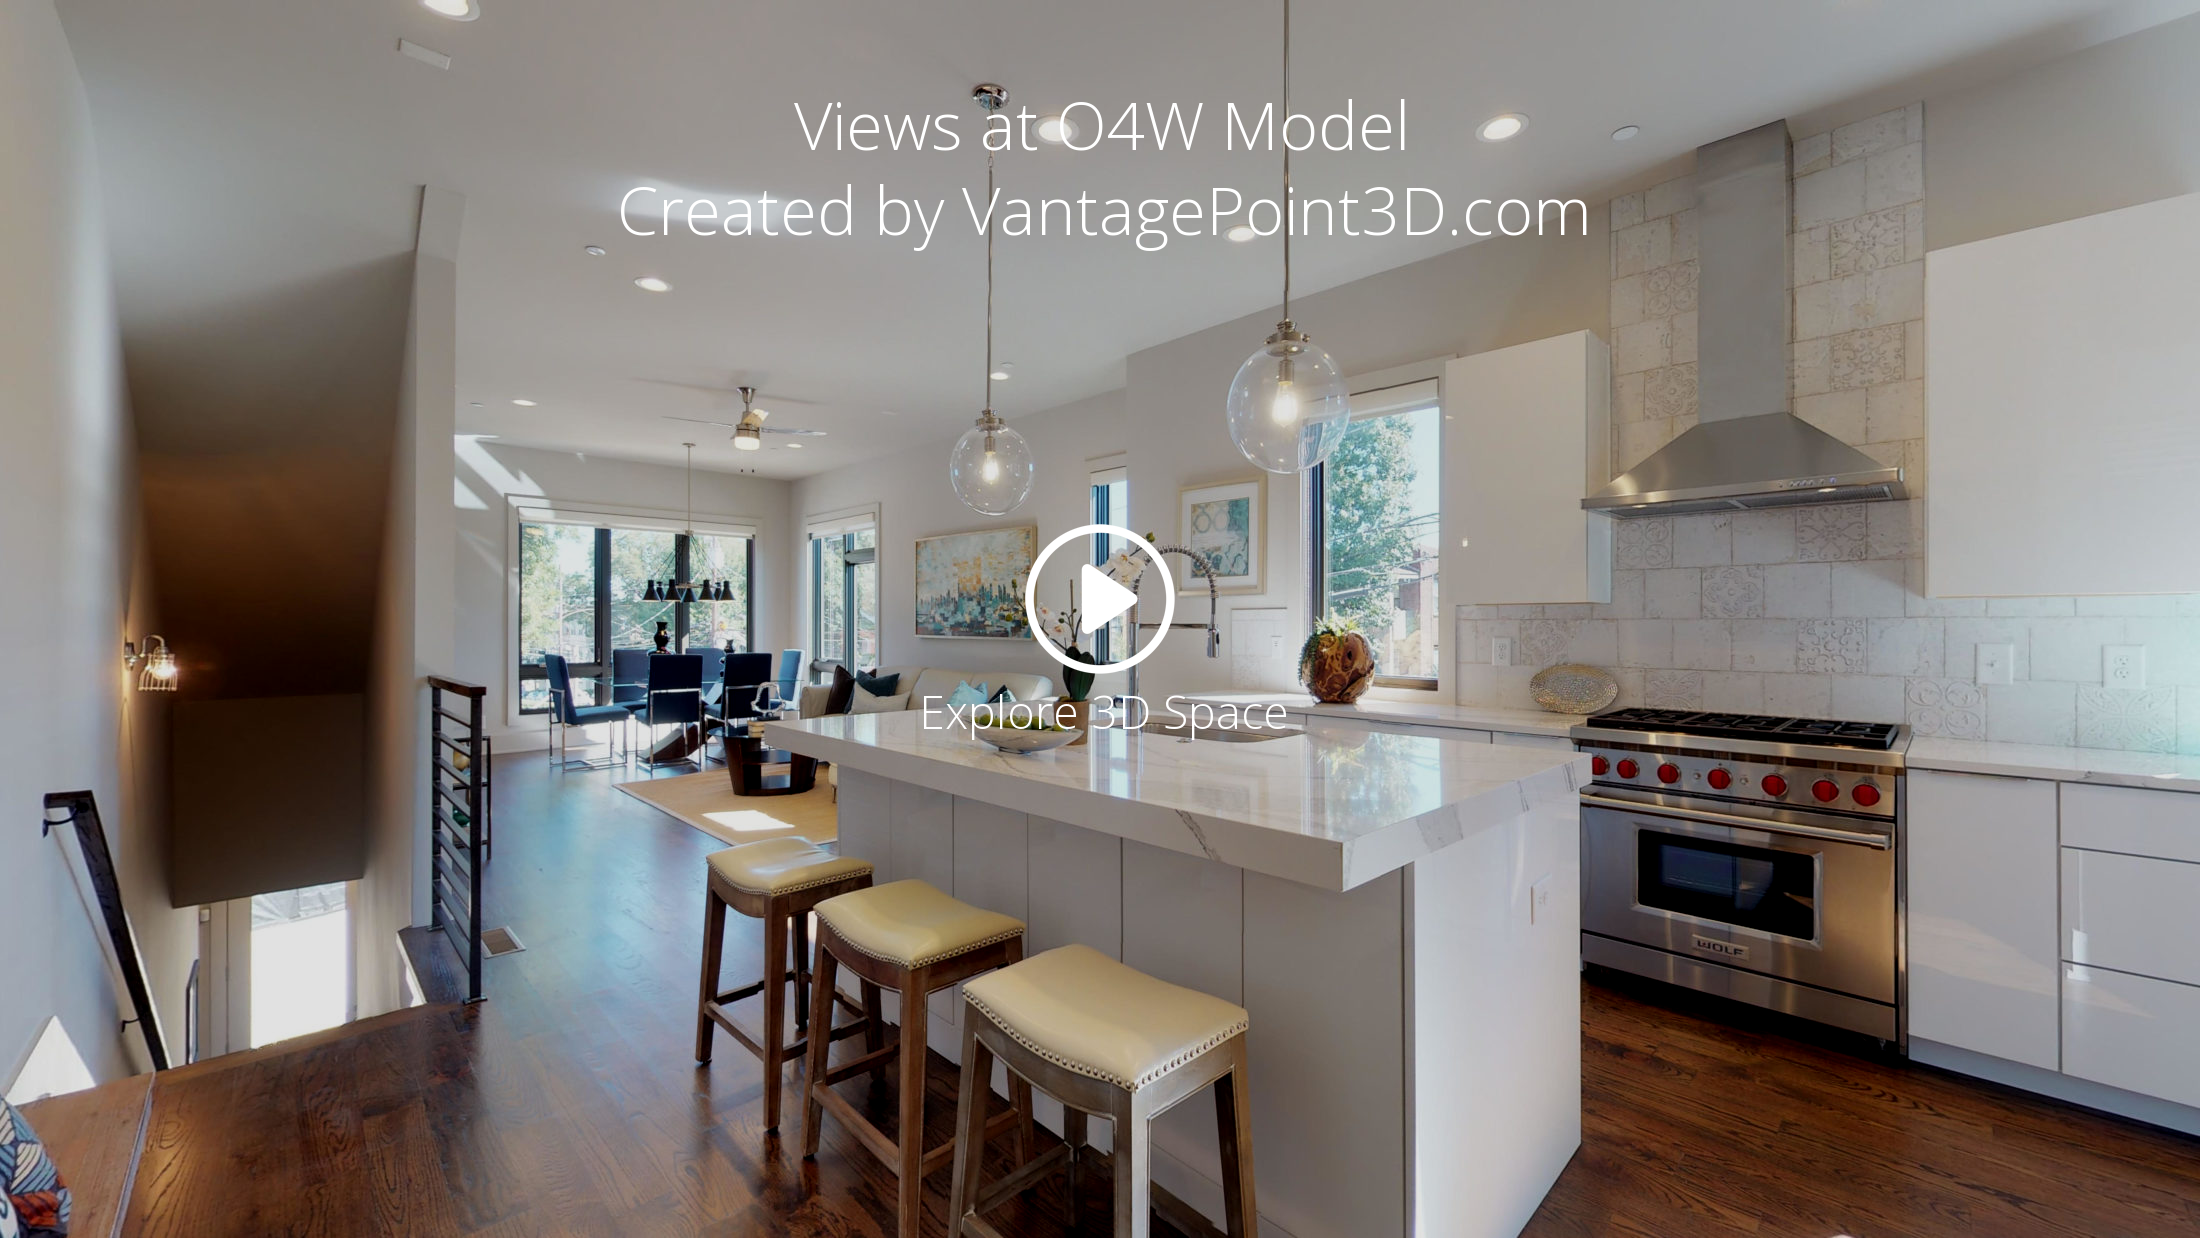 Views-at-O4W-Model-Created-by-VantagePoint3Dcom-KitchenLiving-Room